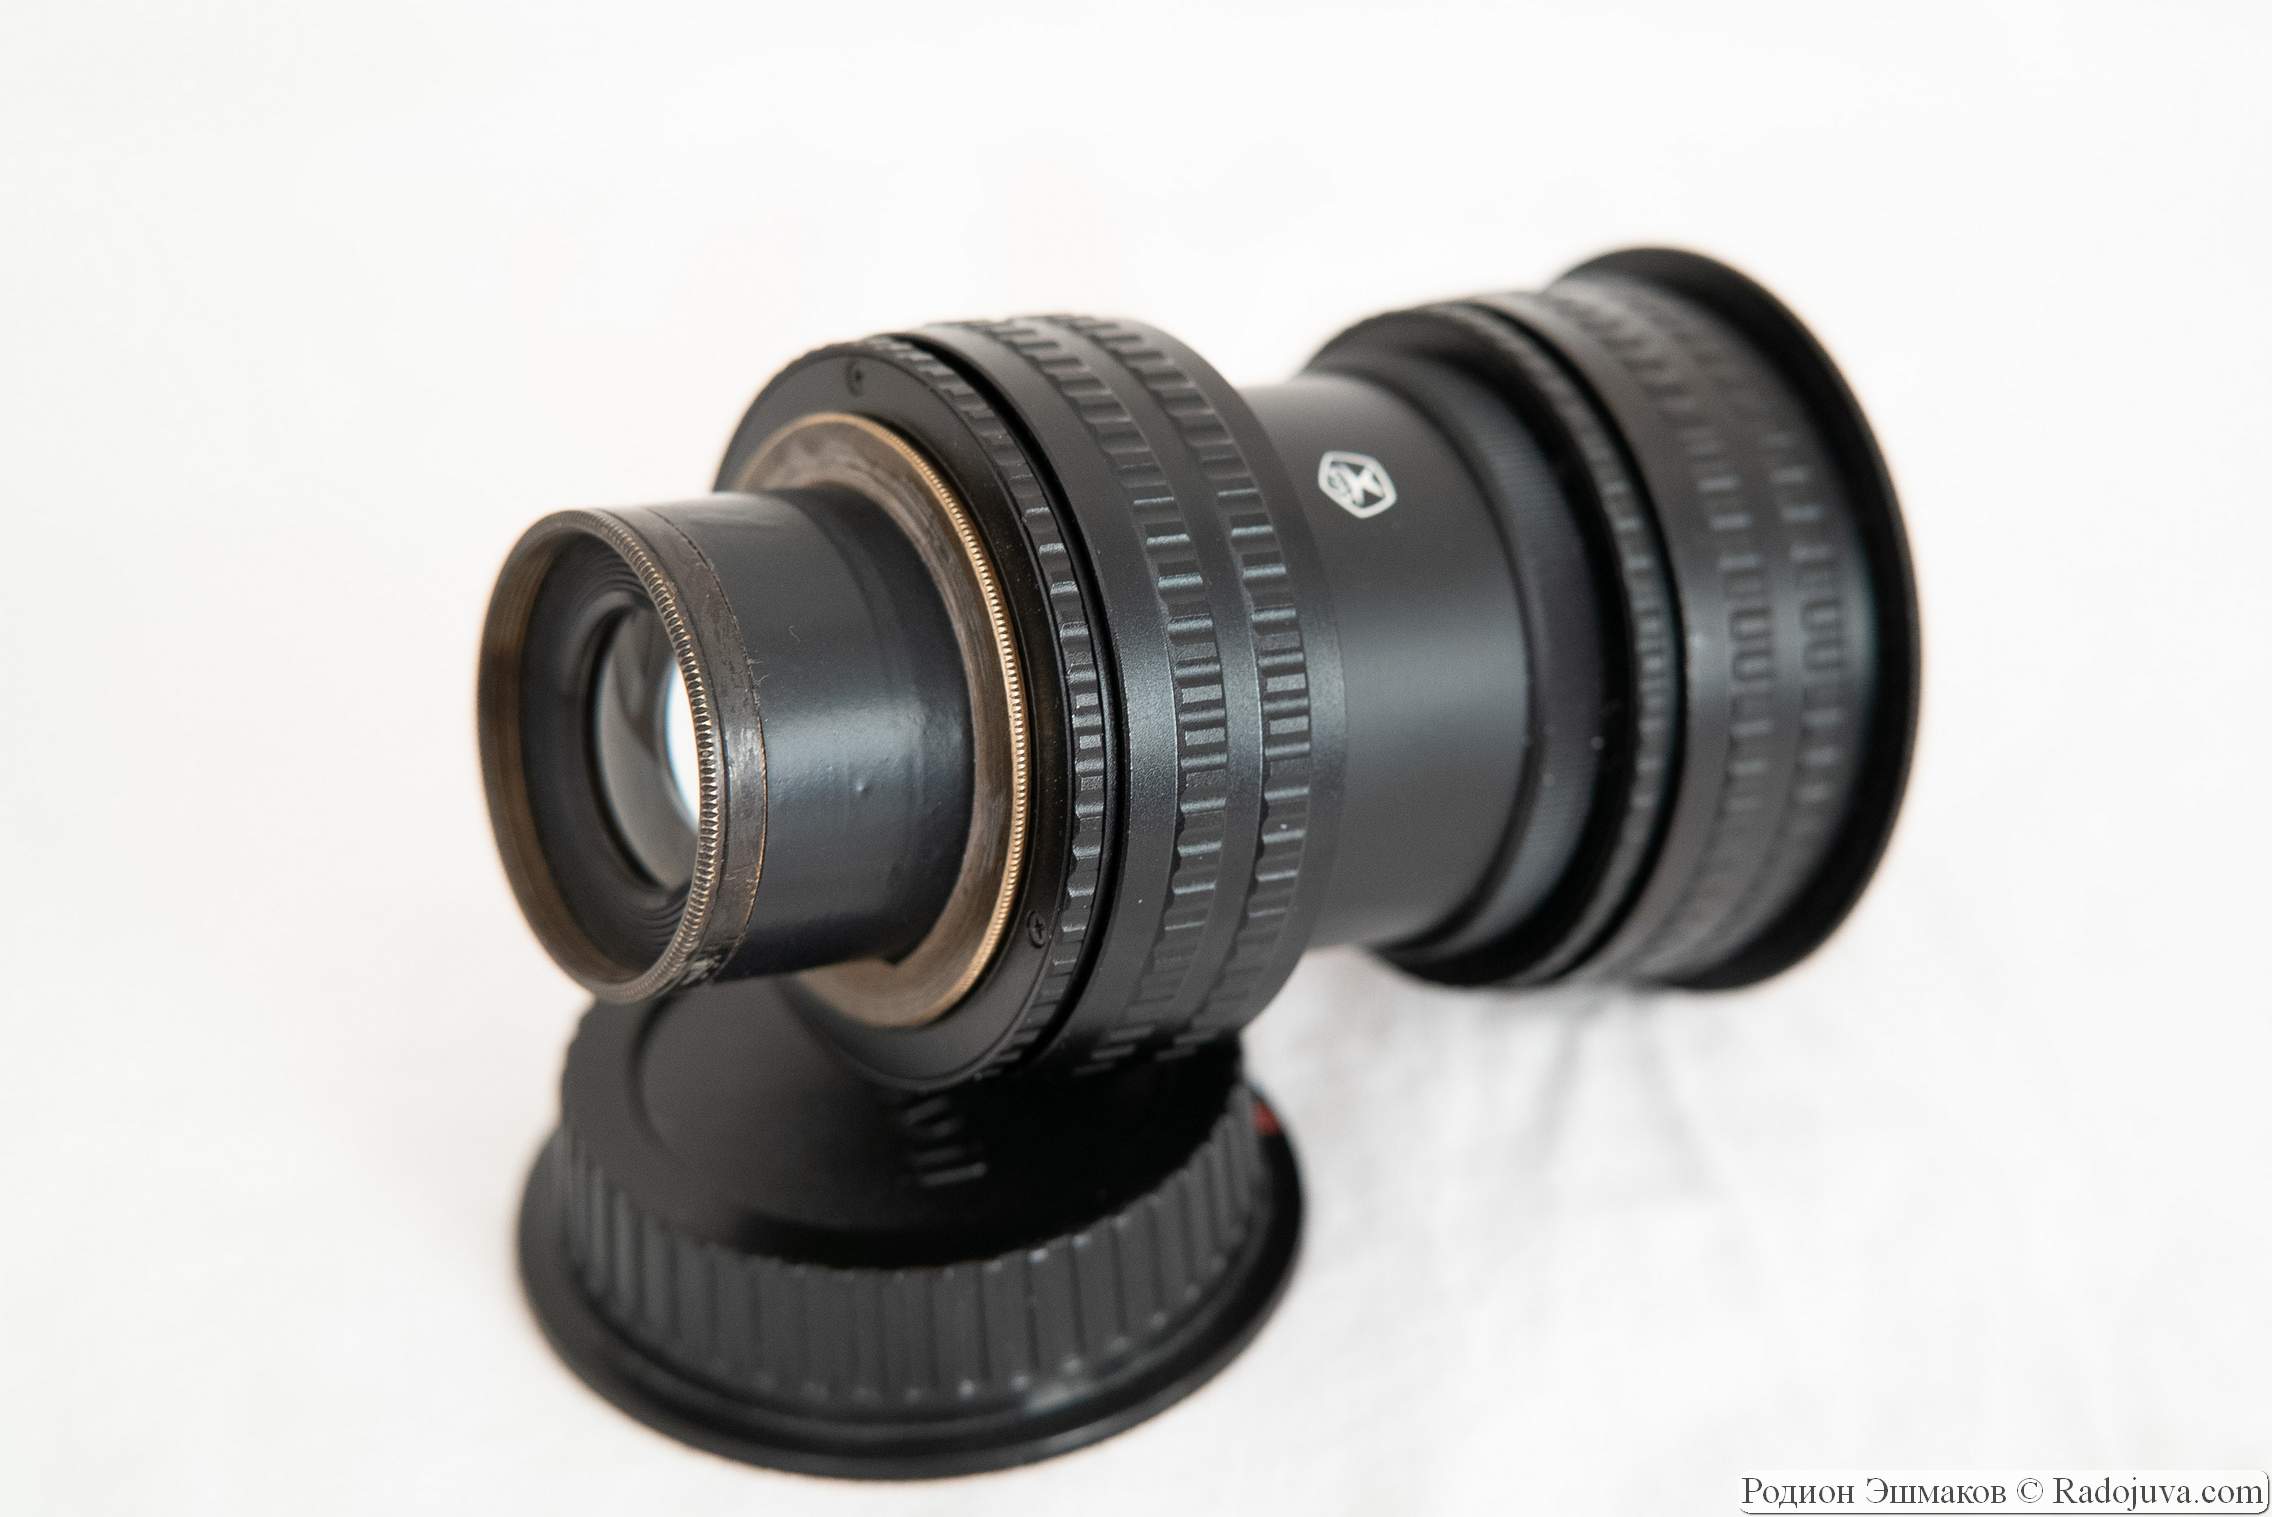 Lens adapted for M42 mount. The aperture slot was sealed with black electrical tape to prevent flare.